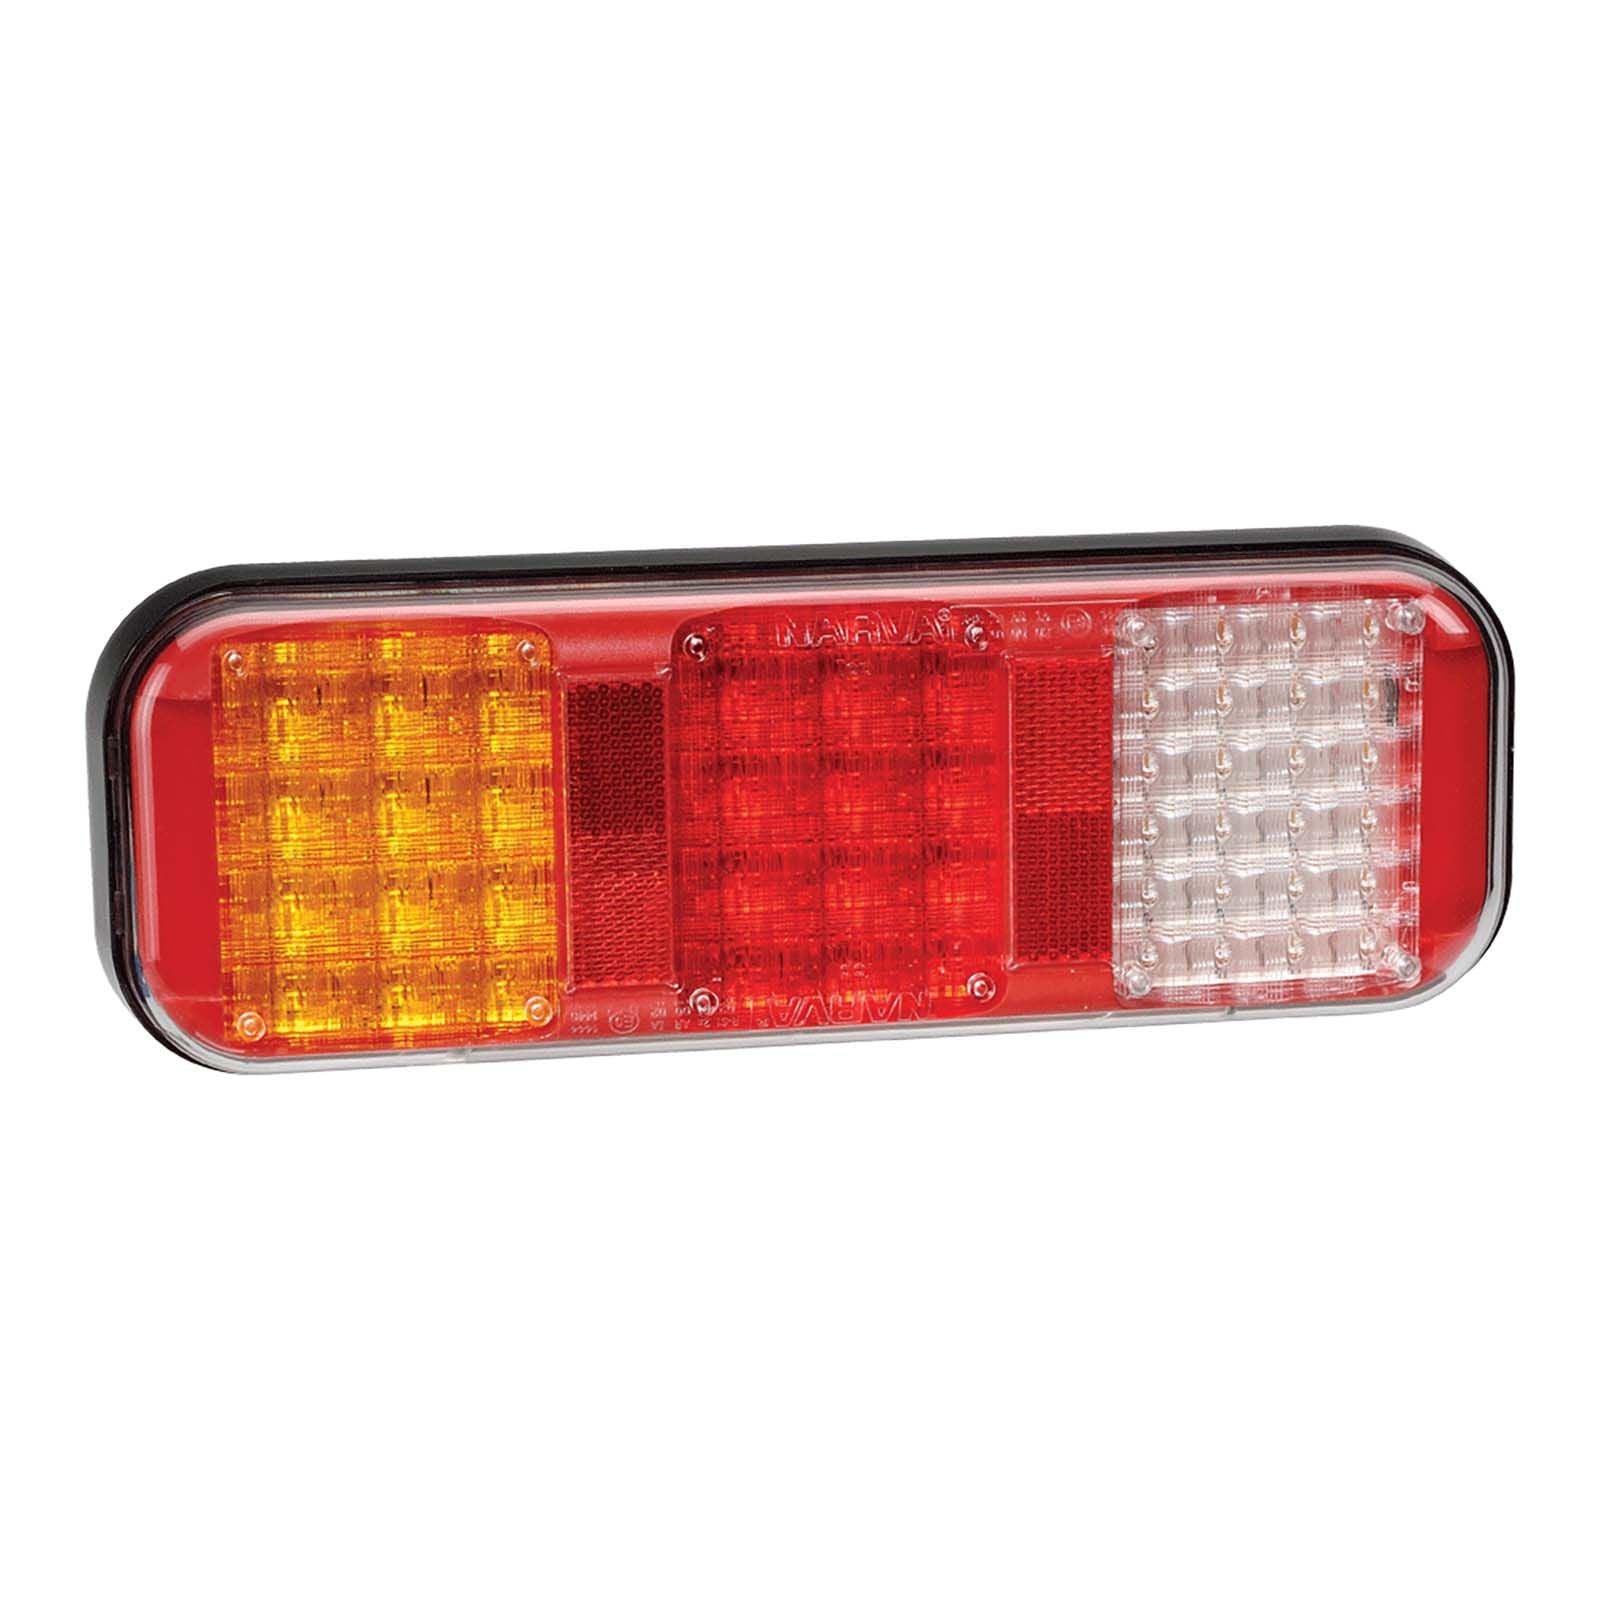 9-33 VOLT MODEL 42 LED REAR STOP/TAIL DIRECTION INDICATOR AND REVERSE LAMP